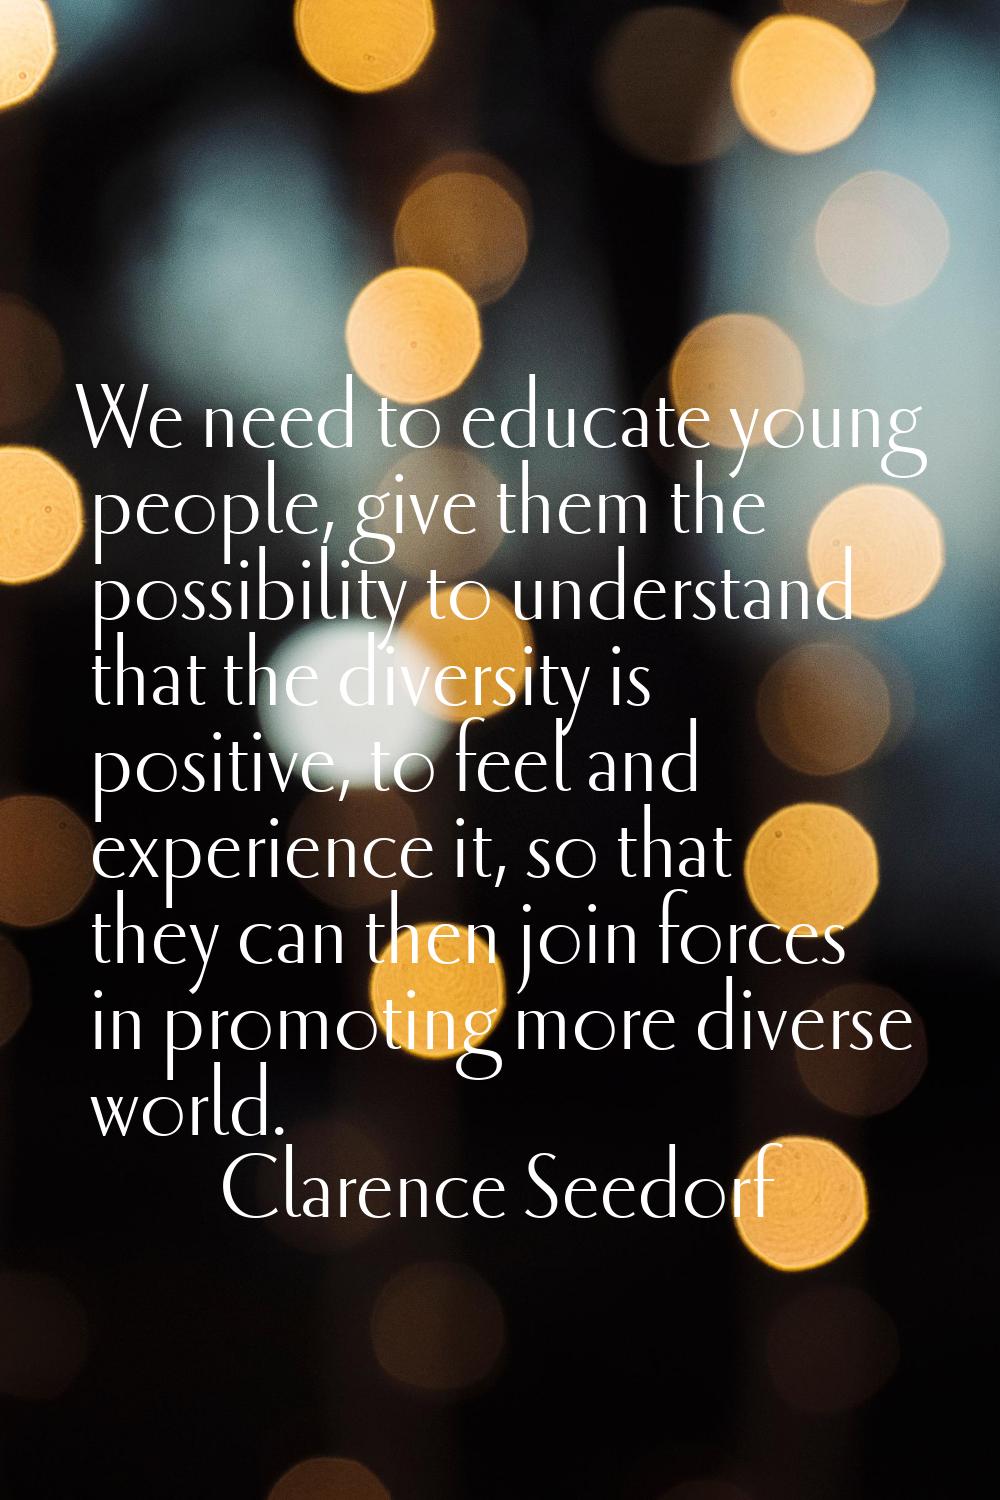 We need to educate young people, give them the possibility to understand that the diversity is posi